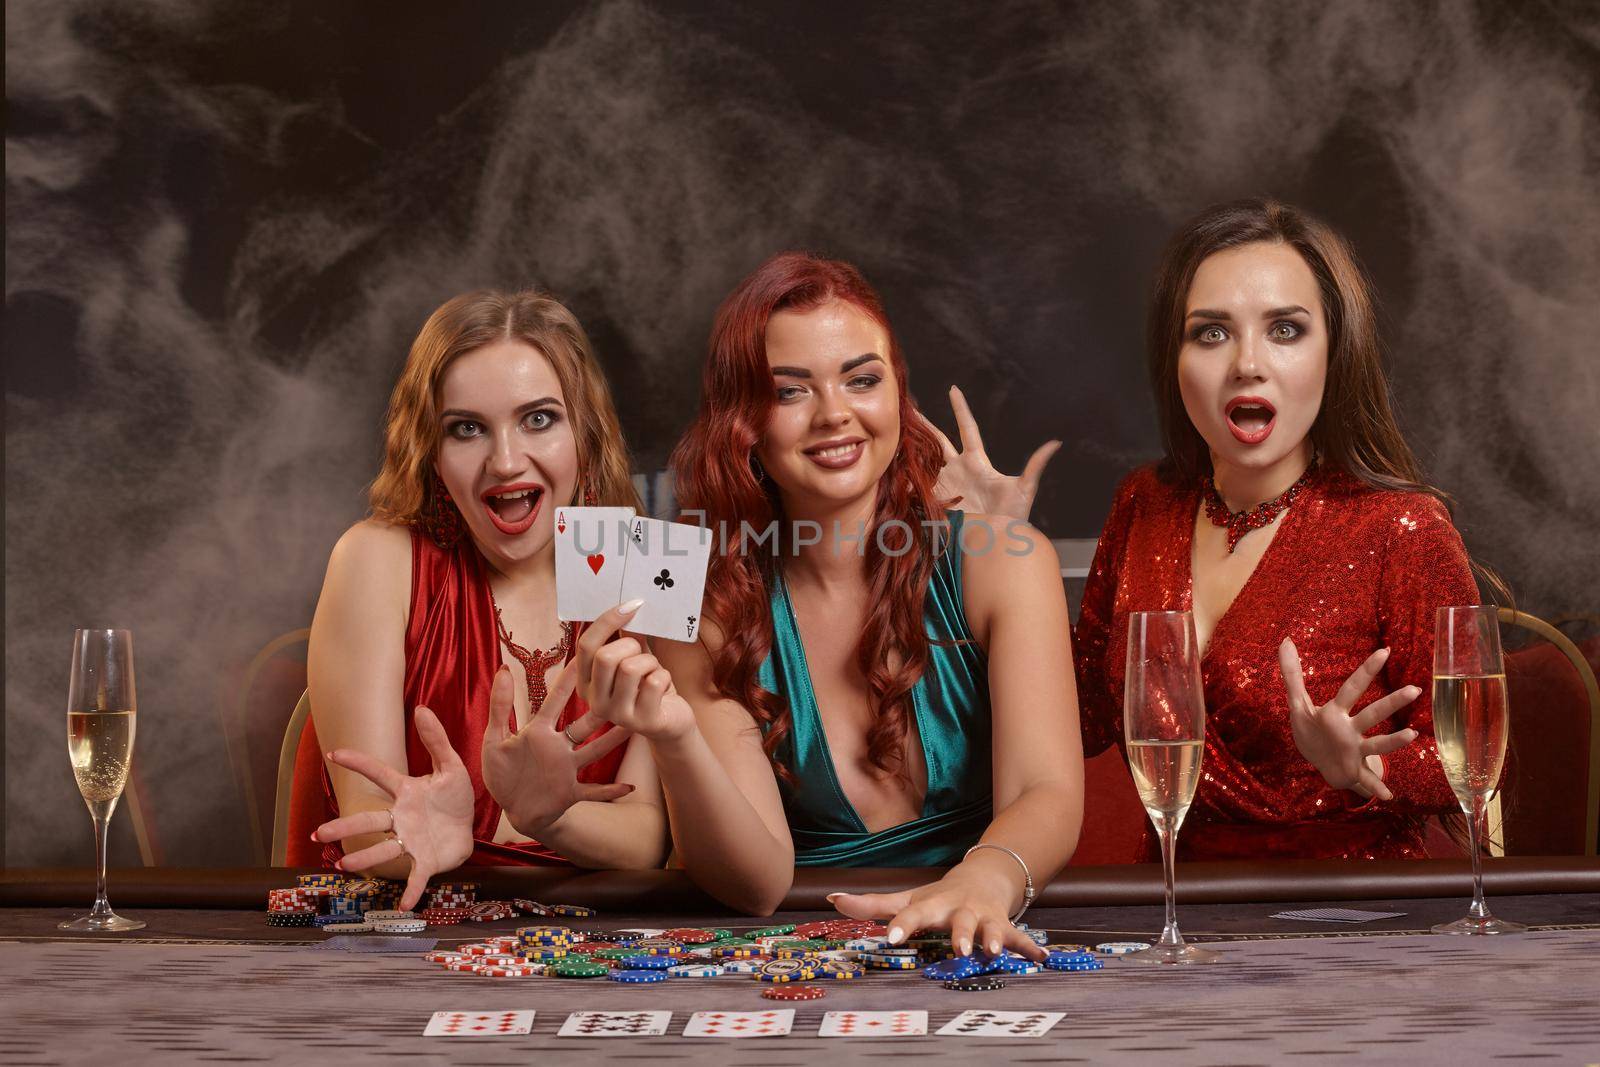 Attractive girls are playing poker at casino. They are celebrating their win, smiling, looking at the camera and posing at the table against a a dark smoke background. Cards, chips, money, alcohol, gambling, entertainment concept.